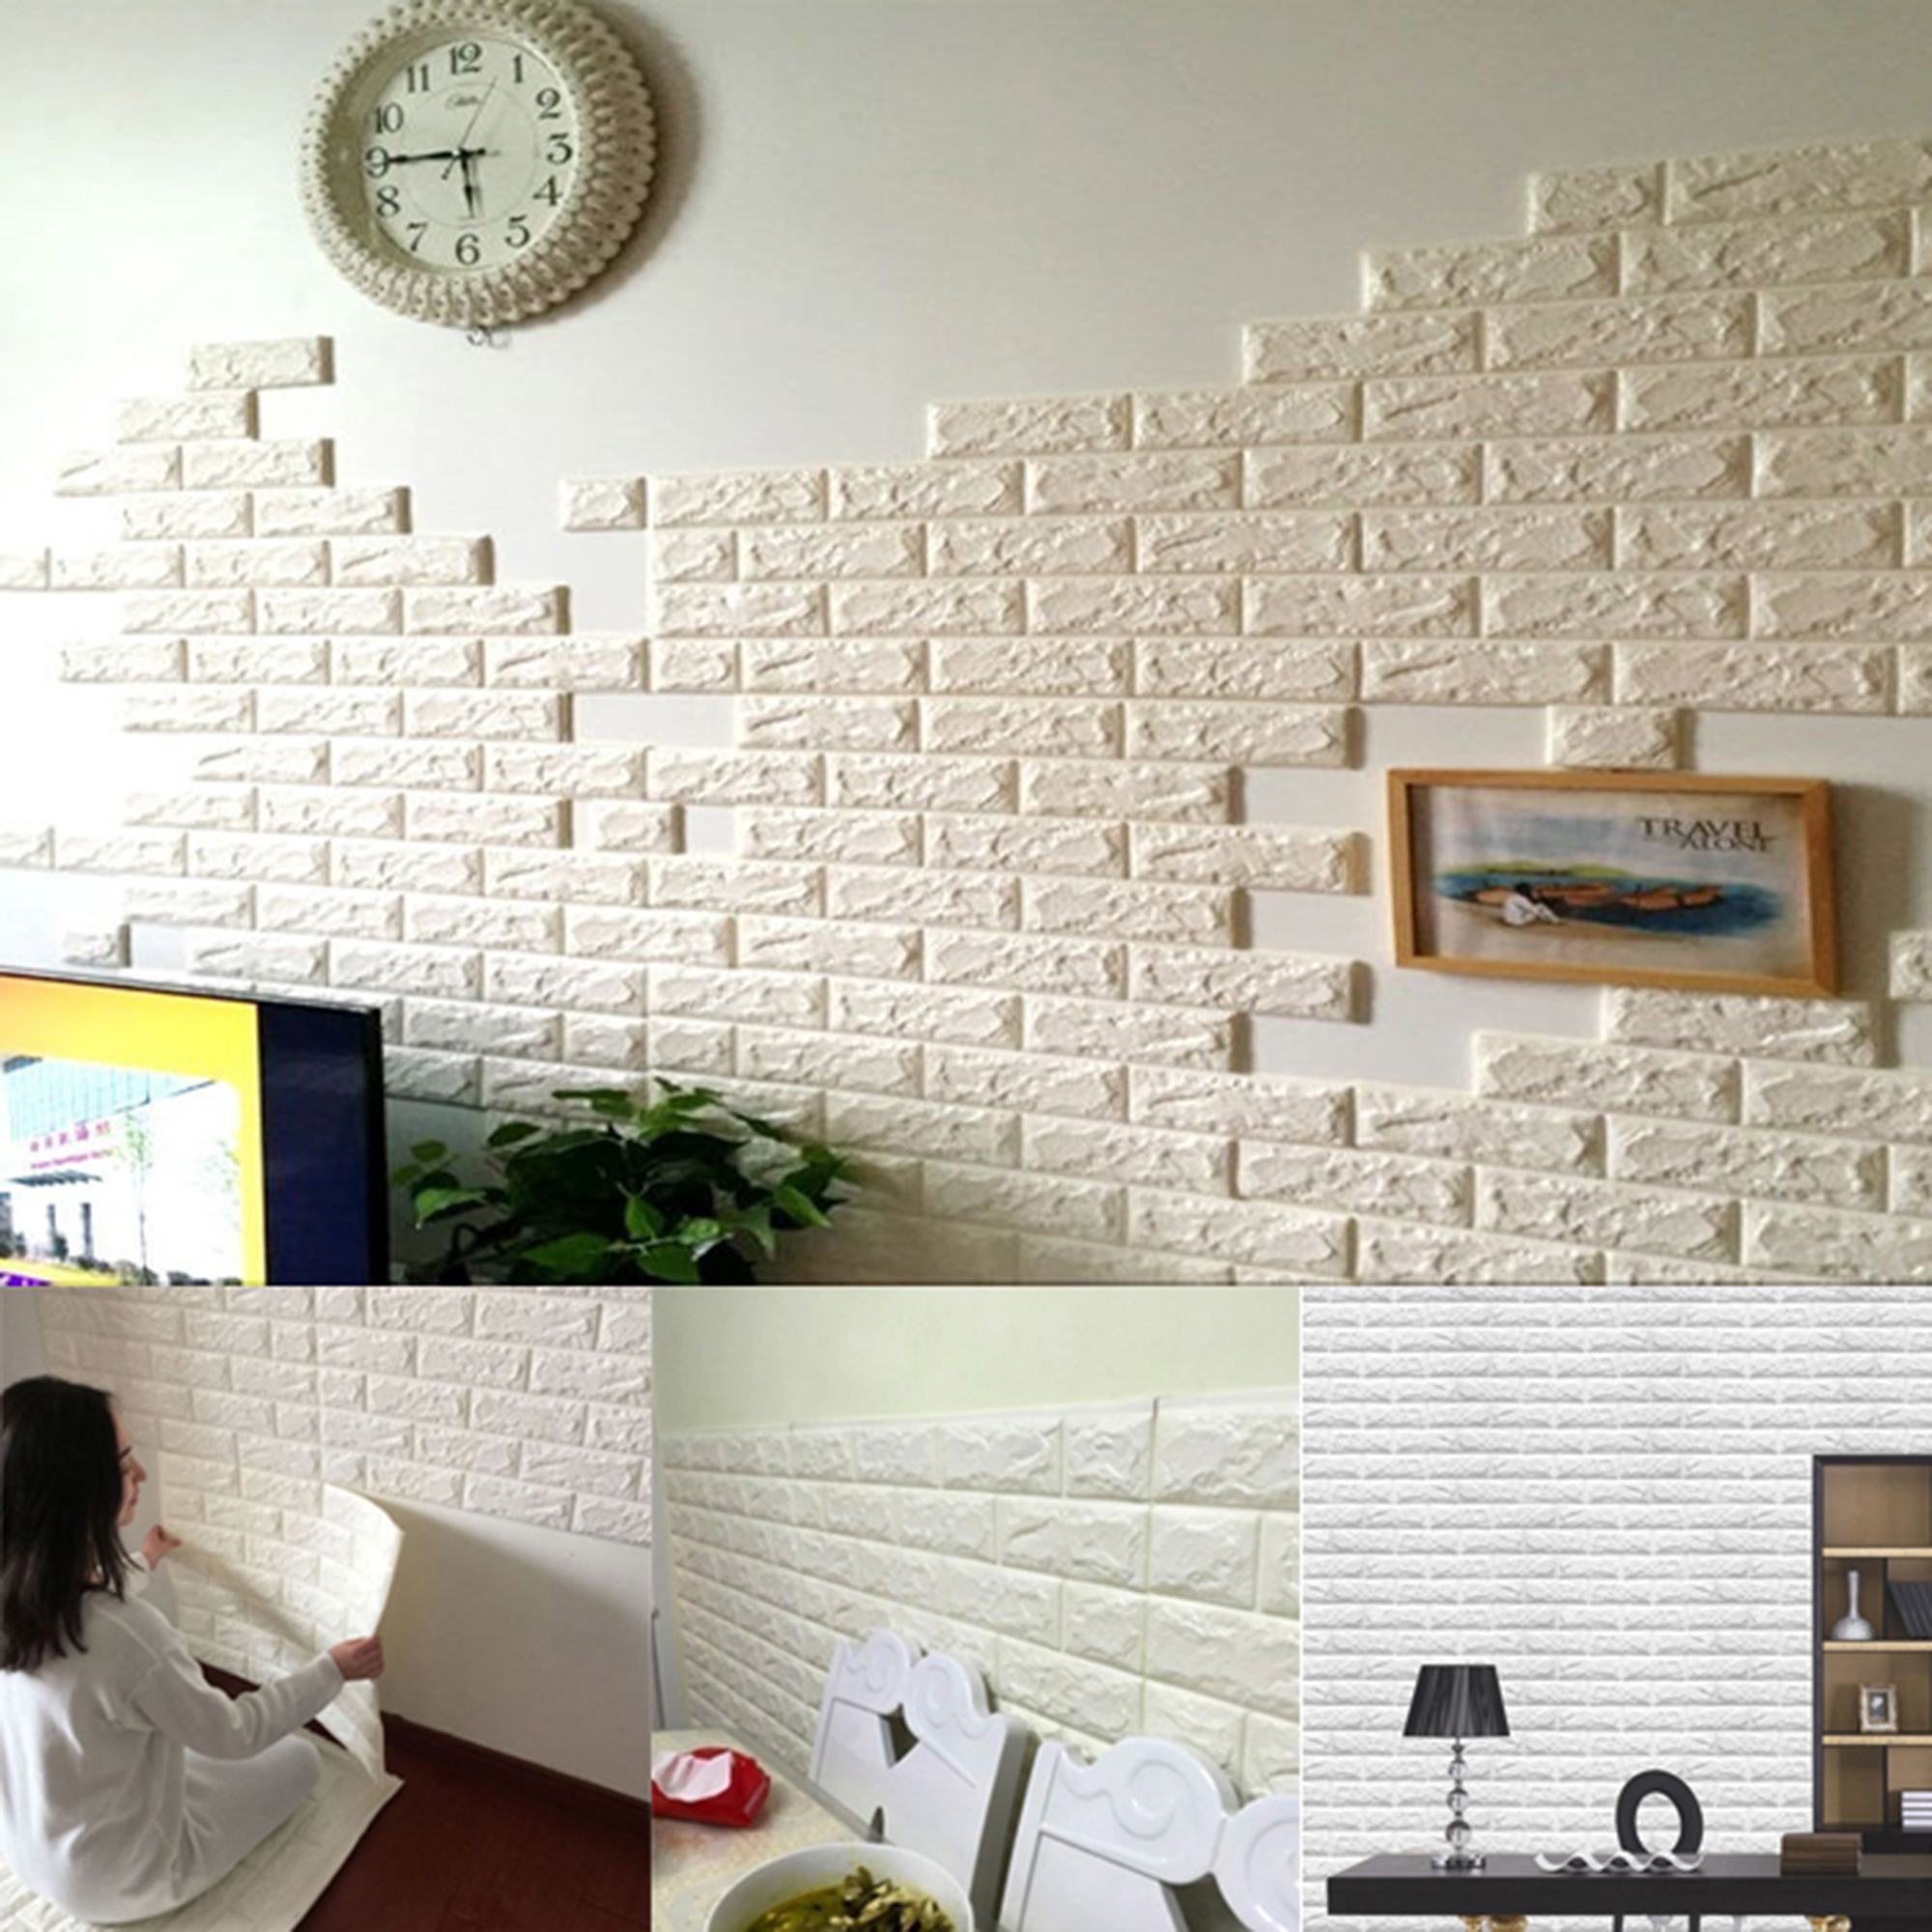 White Foam Brick 3D Wall Panels Peel and Stick Wallpaper Adhesive Textured Brick Tiles Waterproof Brick Pattern Wall Stickers Bedroom Living Room Background Decorative for Home Decor - image 2 of 7